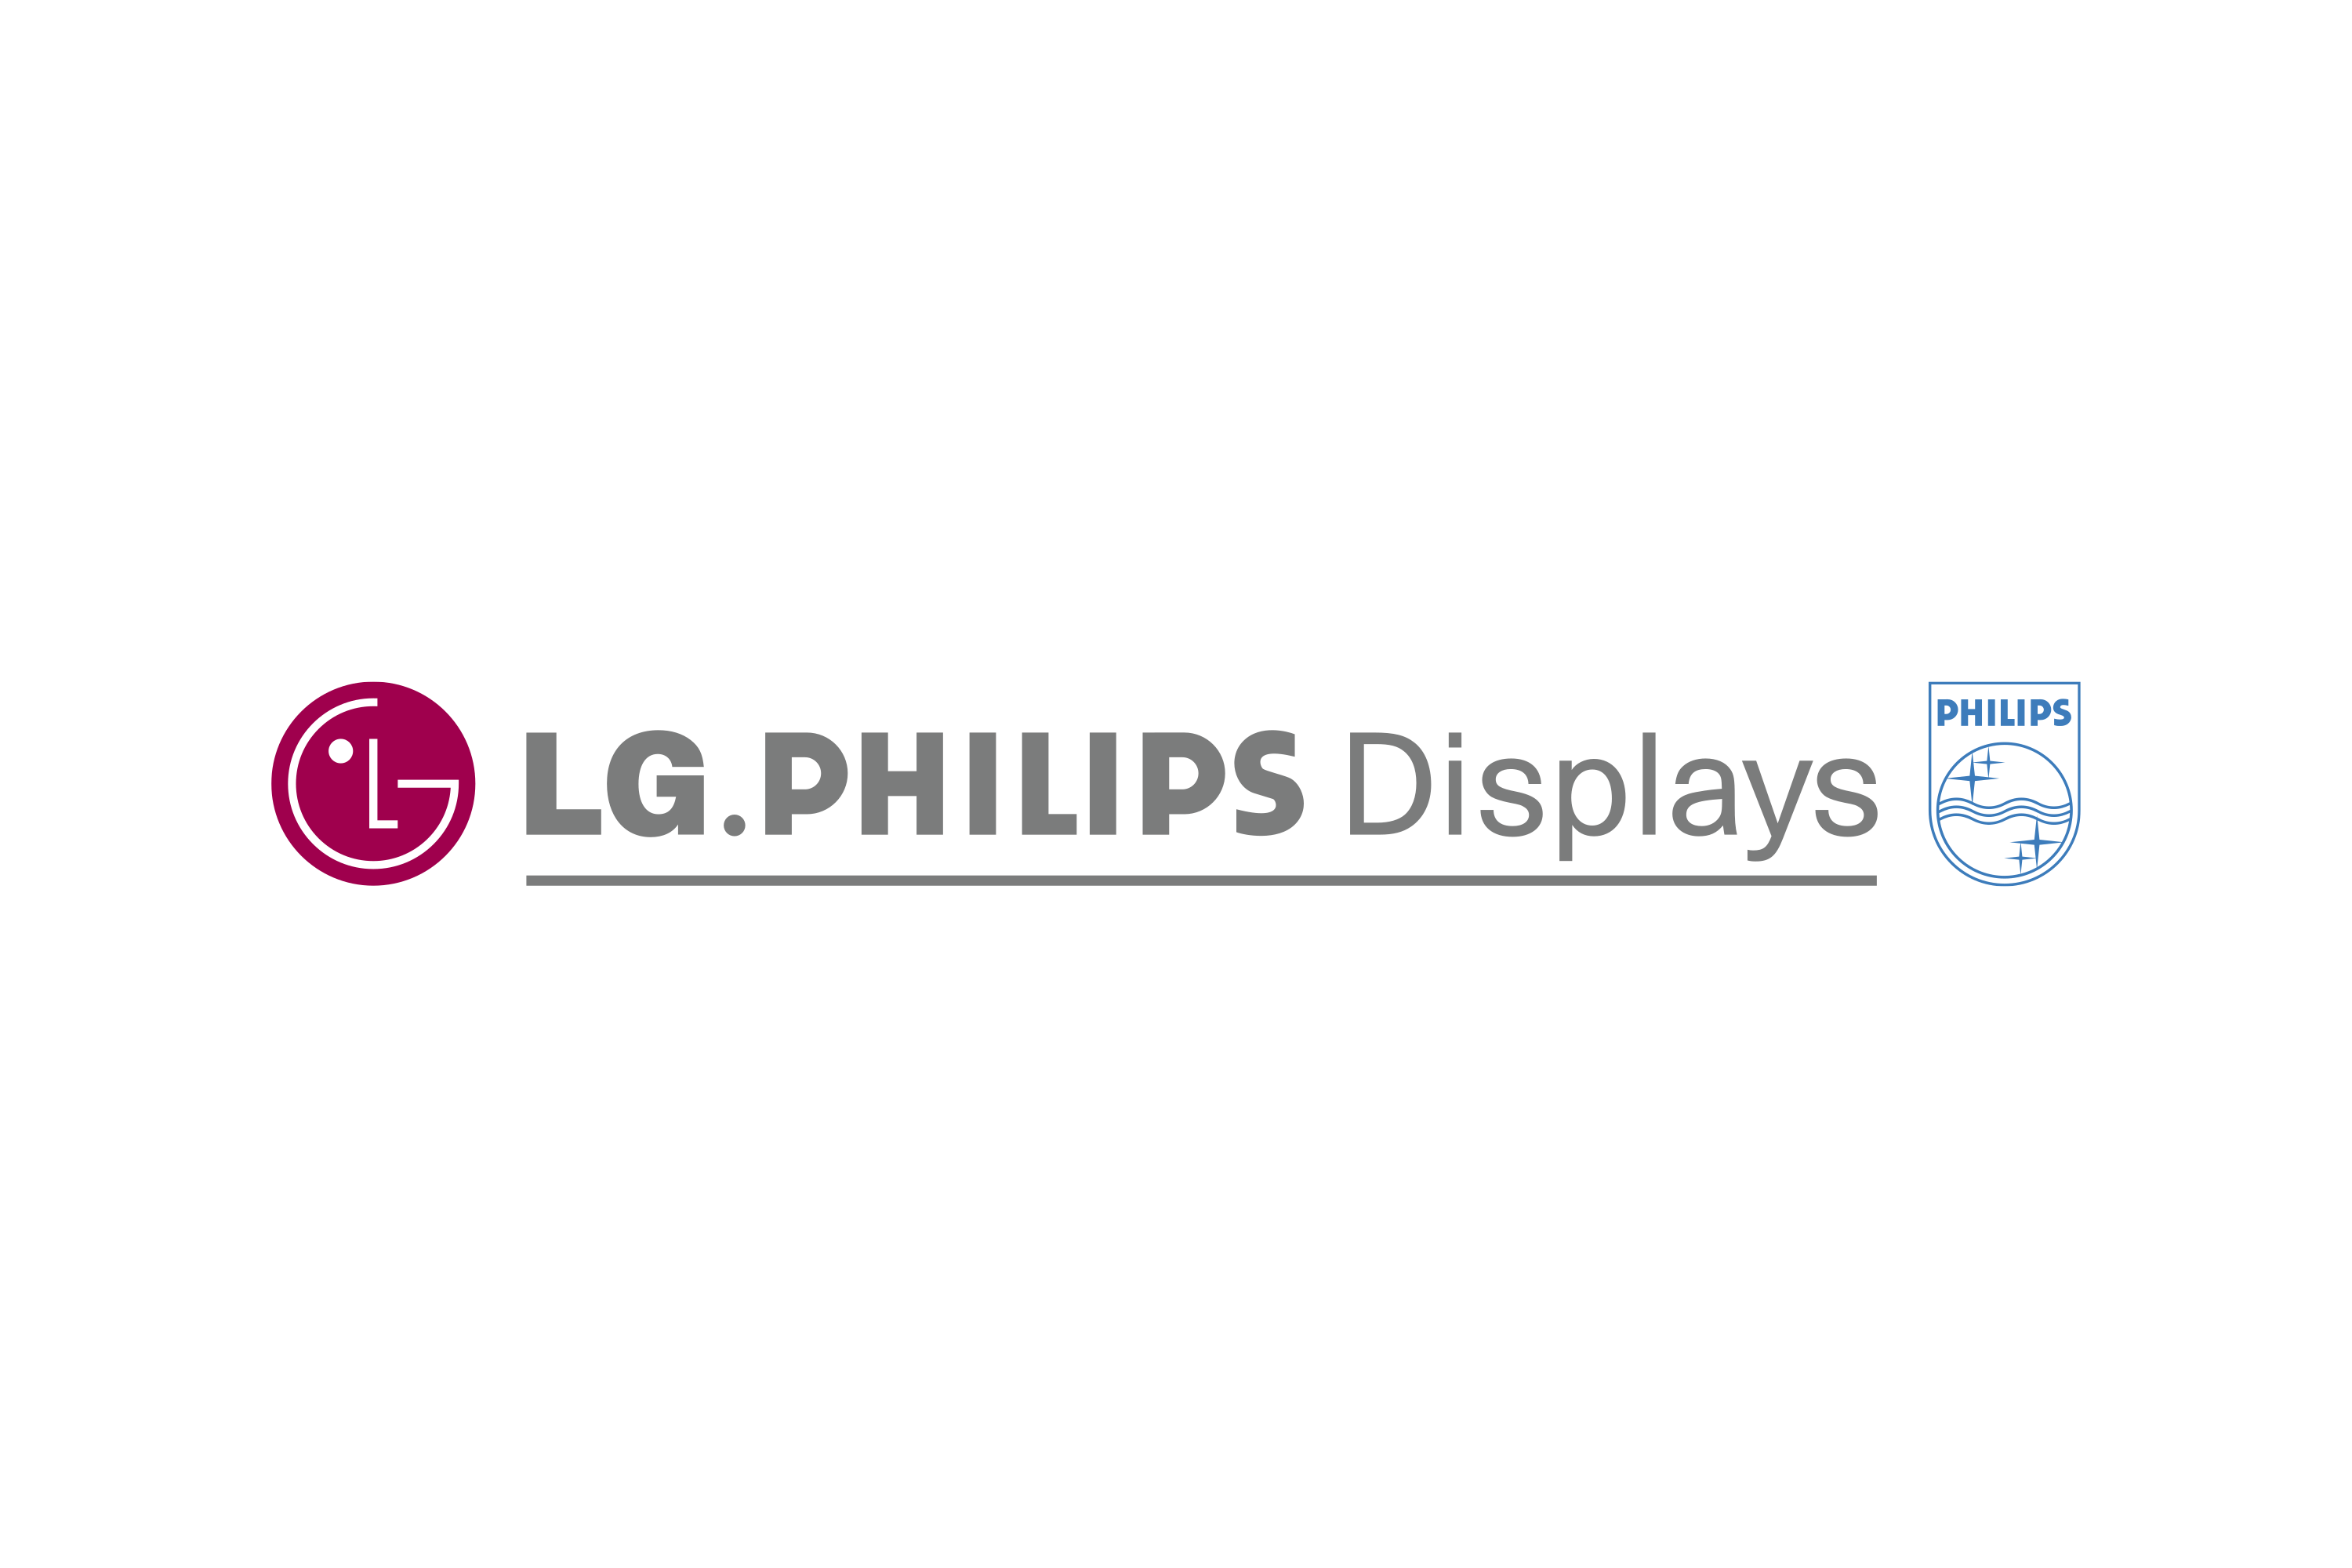 philips logo png